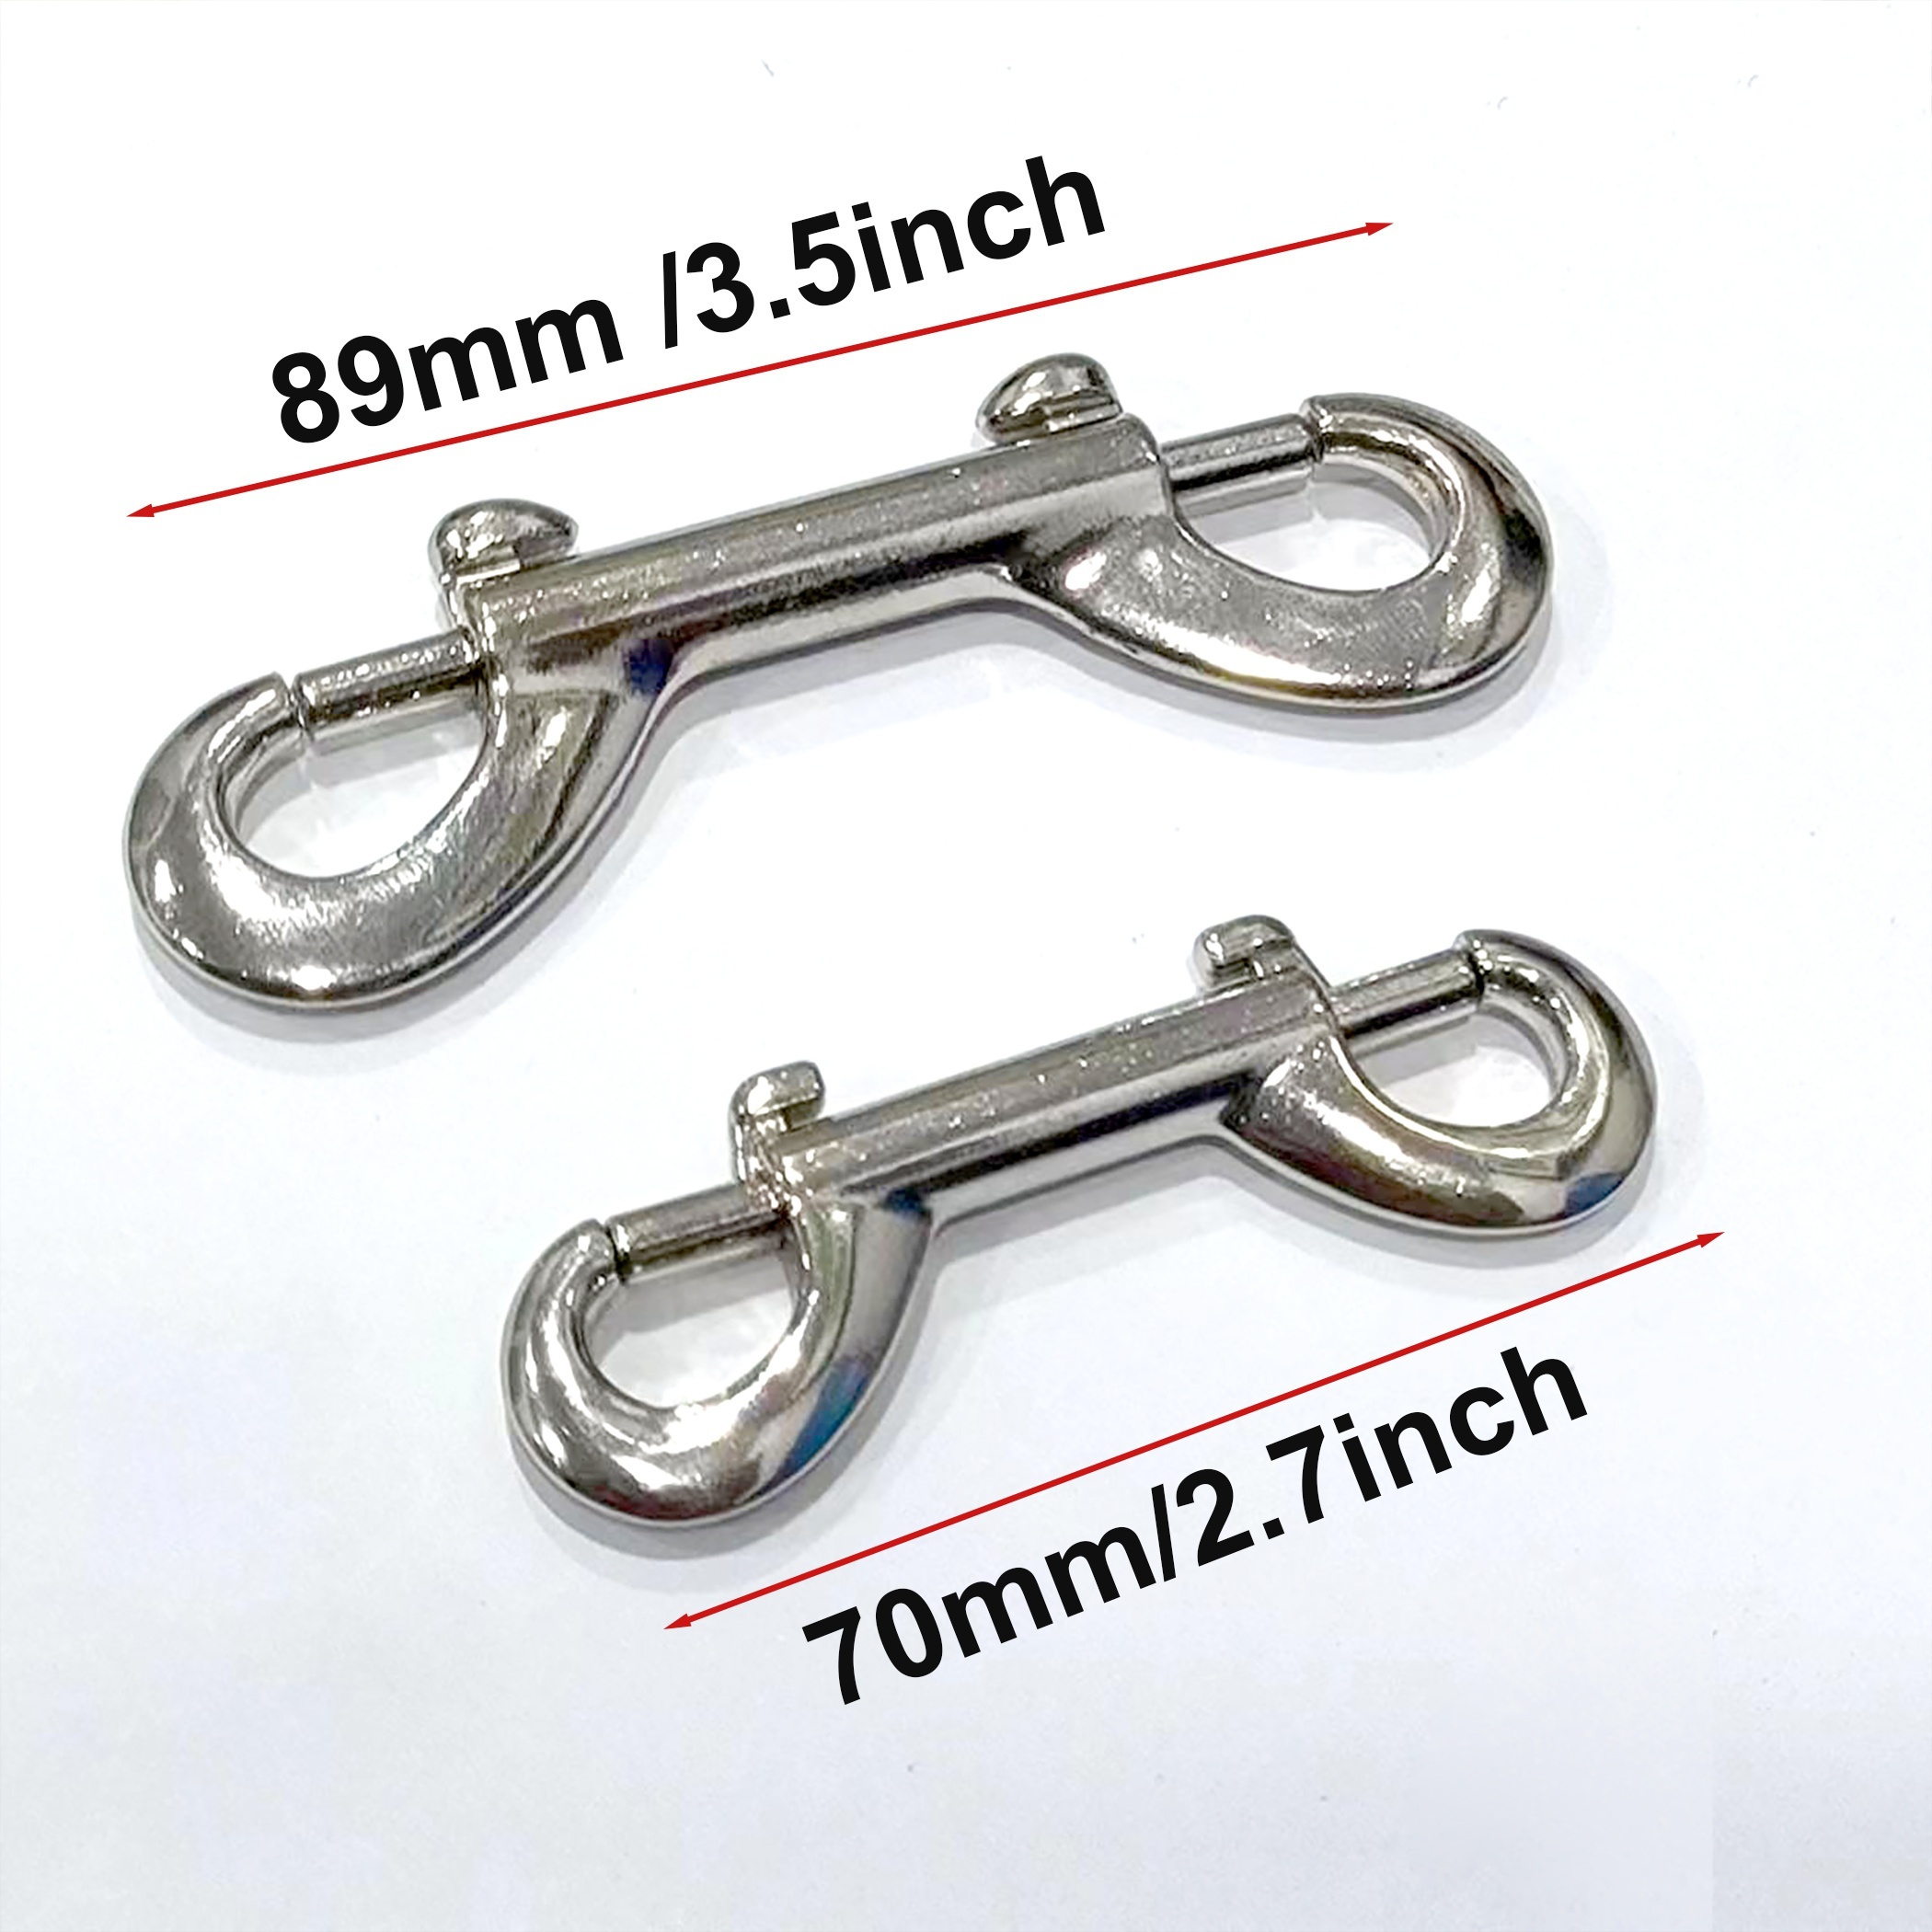 4 Pcs Two-end Binding Hook Double Ended Spring Hook Heavy Duty Keychain  Bolt Snaps Chain Leash Trigger Chain Clips Stainless Steel Hooks Long Snap